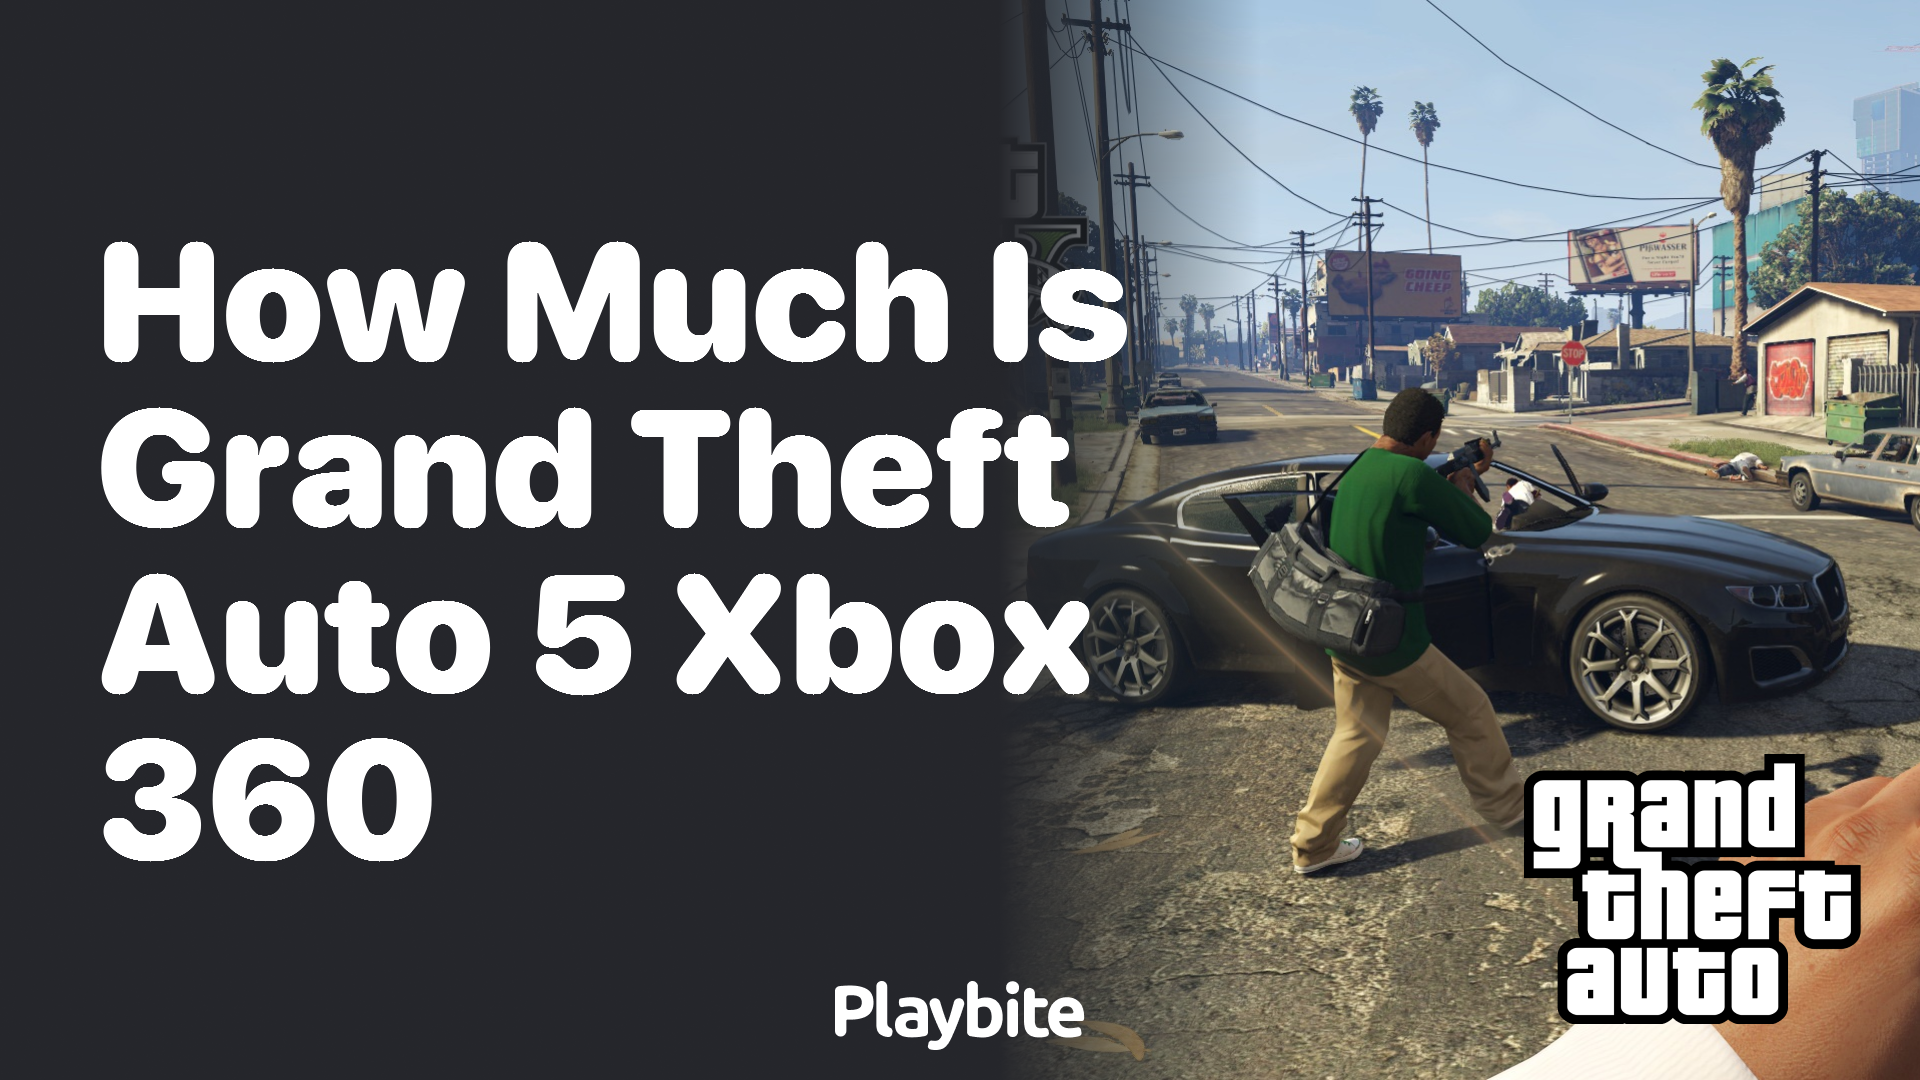 How much is Grand Theft Auto 5 for Xbox 360?